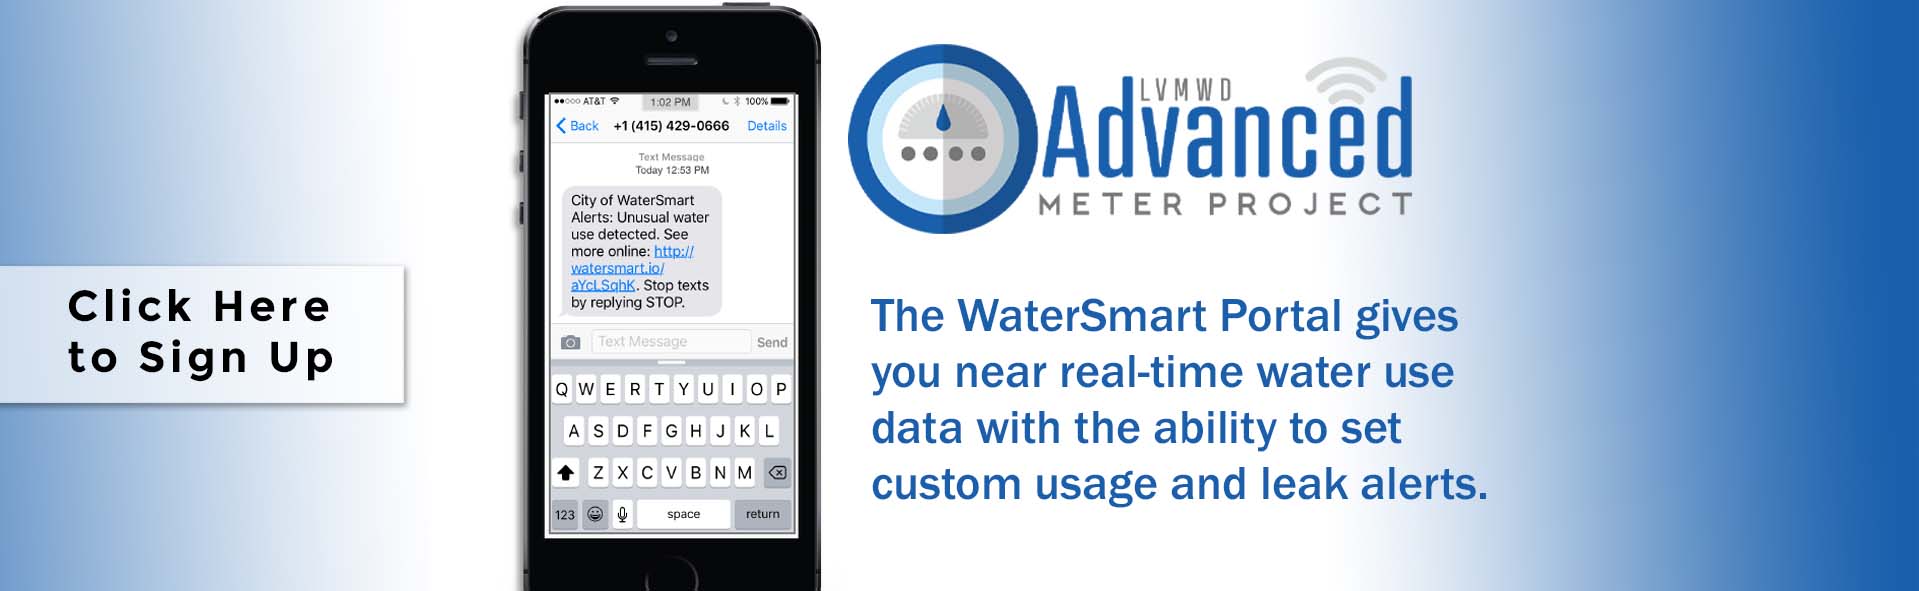 Near real-time water use data and customizable alerts - sign up now